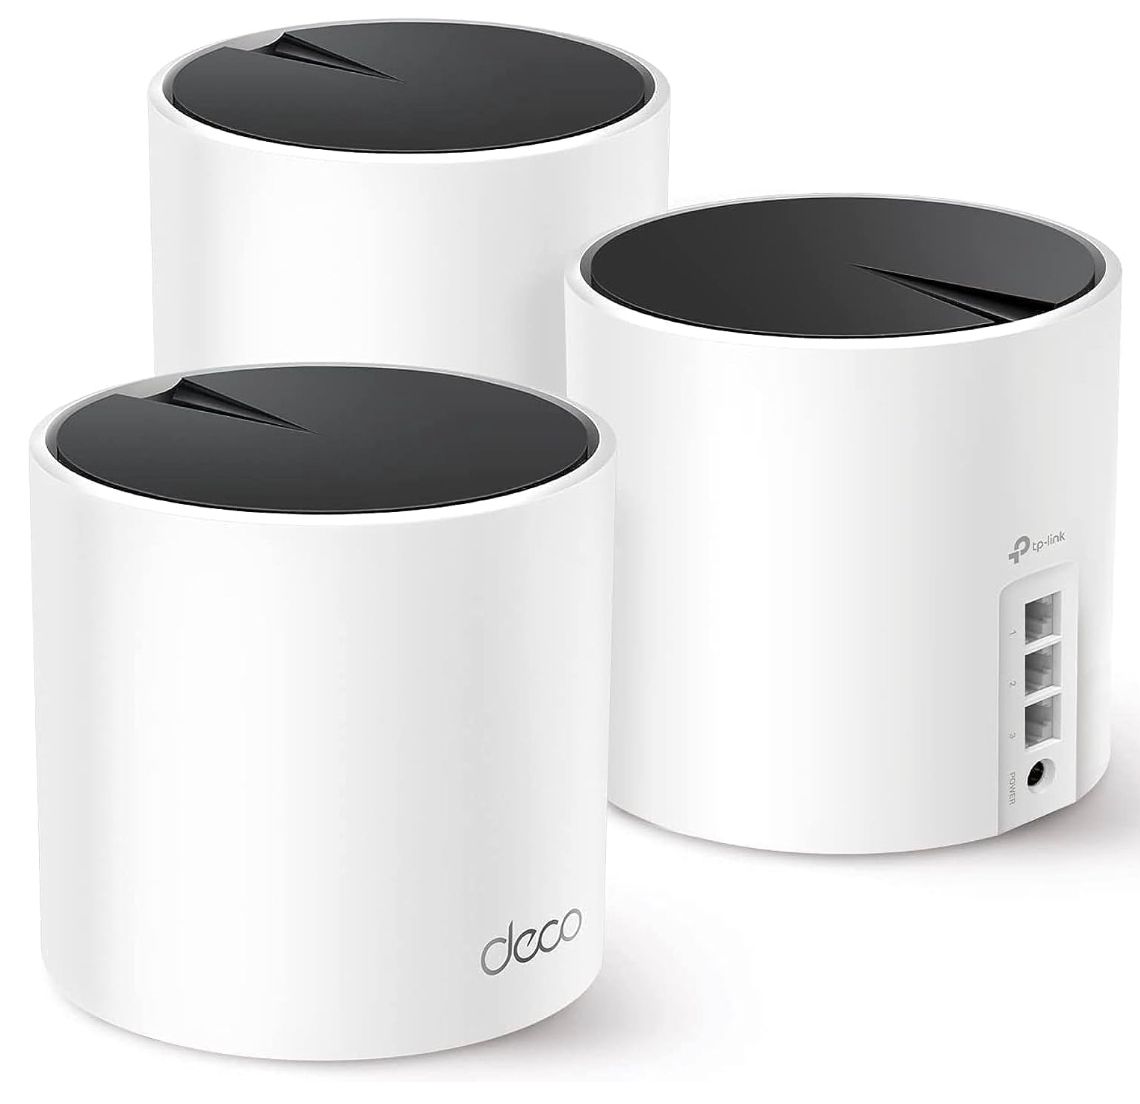 Three pack of TP-Link Deco mesh routers. 